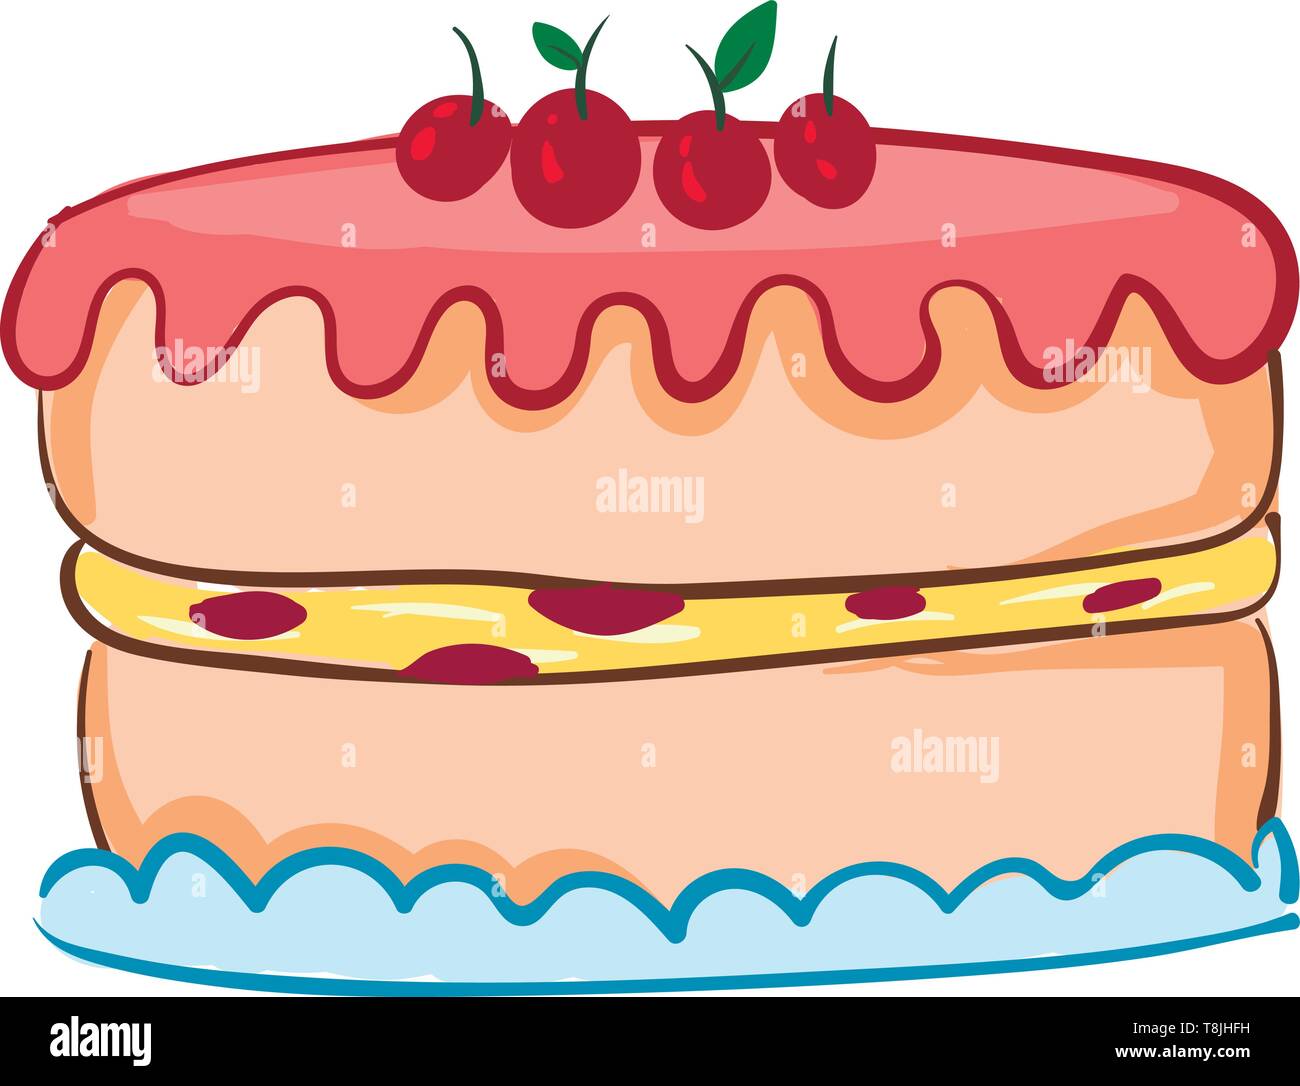 Drawing of a round cake with pink frosting on top and cherries, with yellow and red filling on a blue tray., vector, color drawing or illustration. Stock Vector